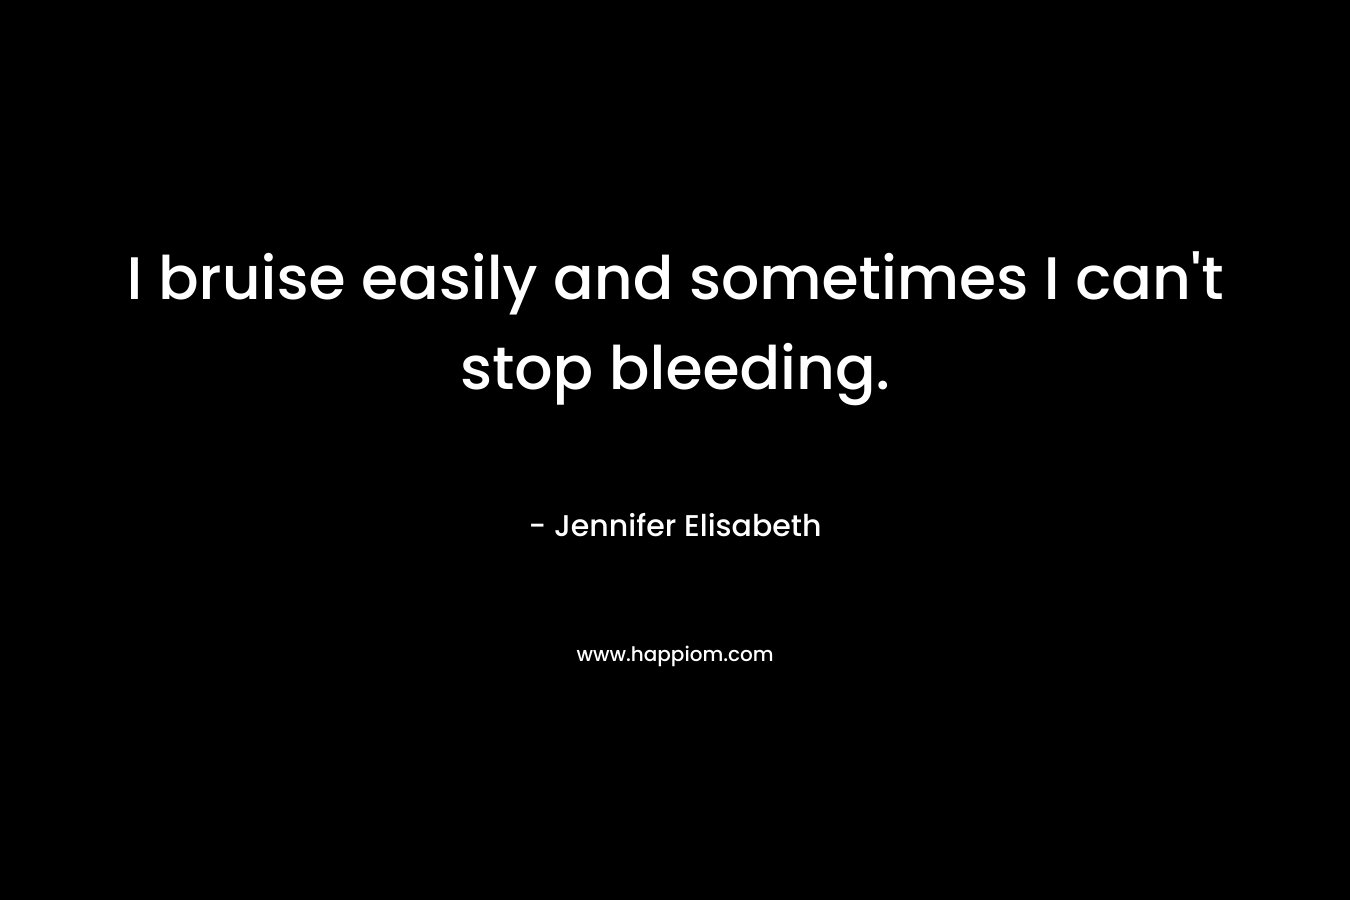 I bruise easily and sometimes I can't stop bleeding.